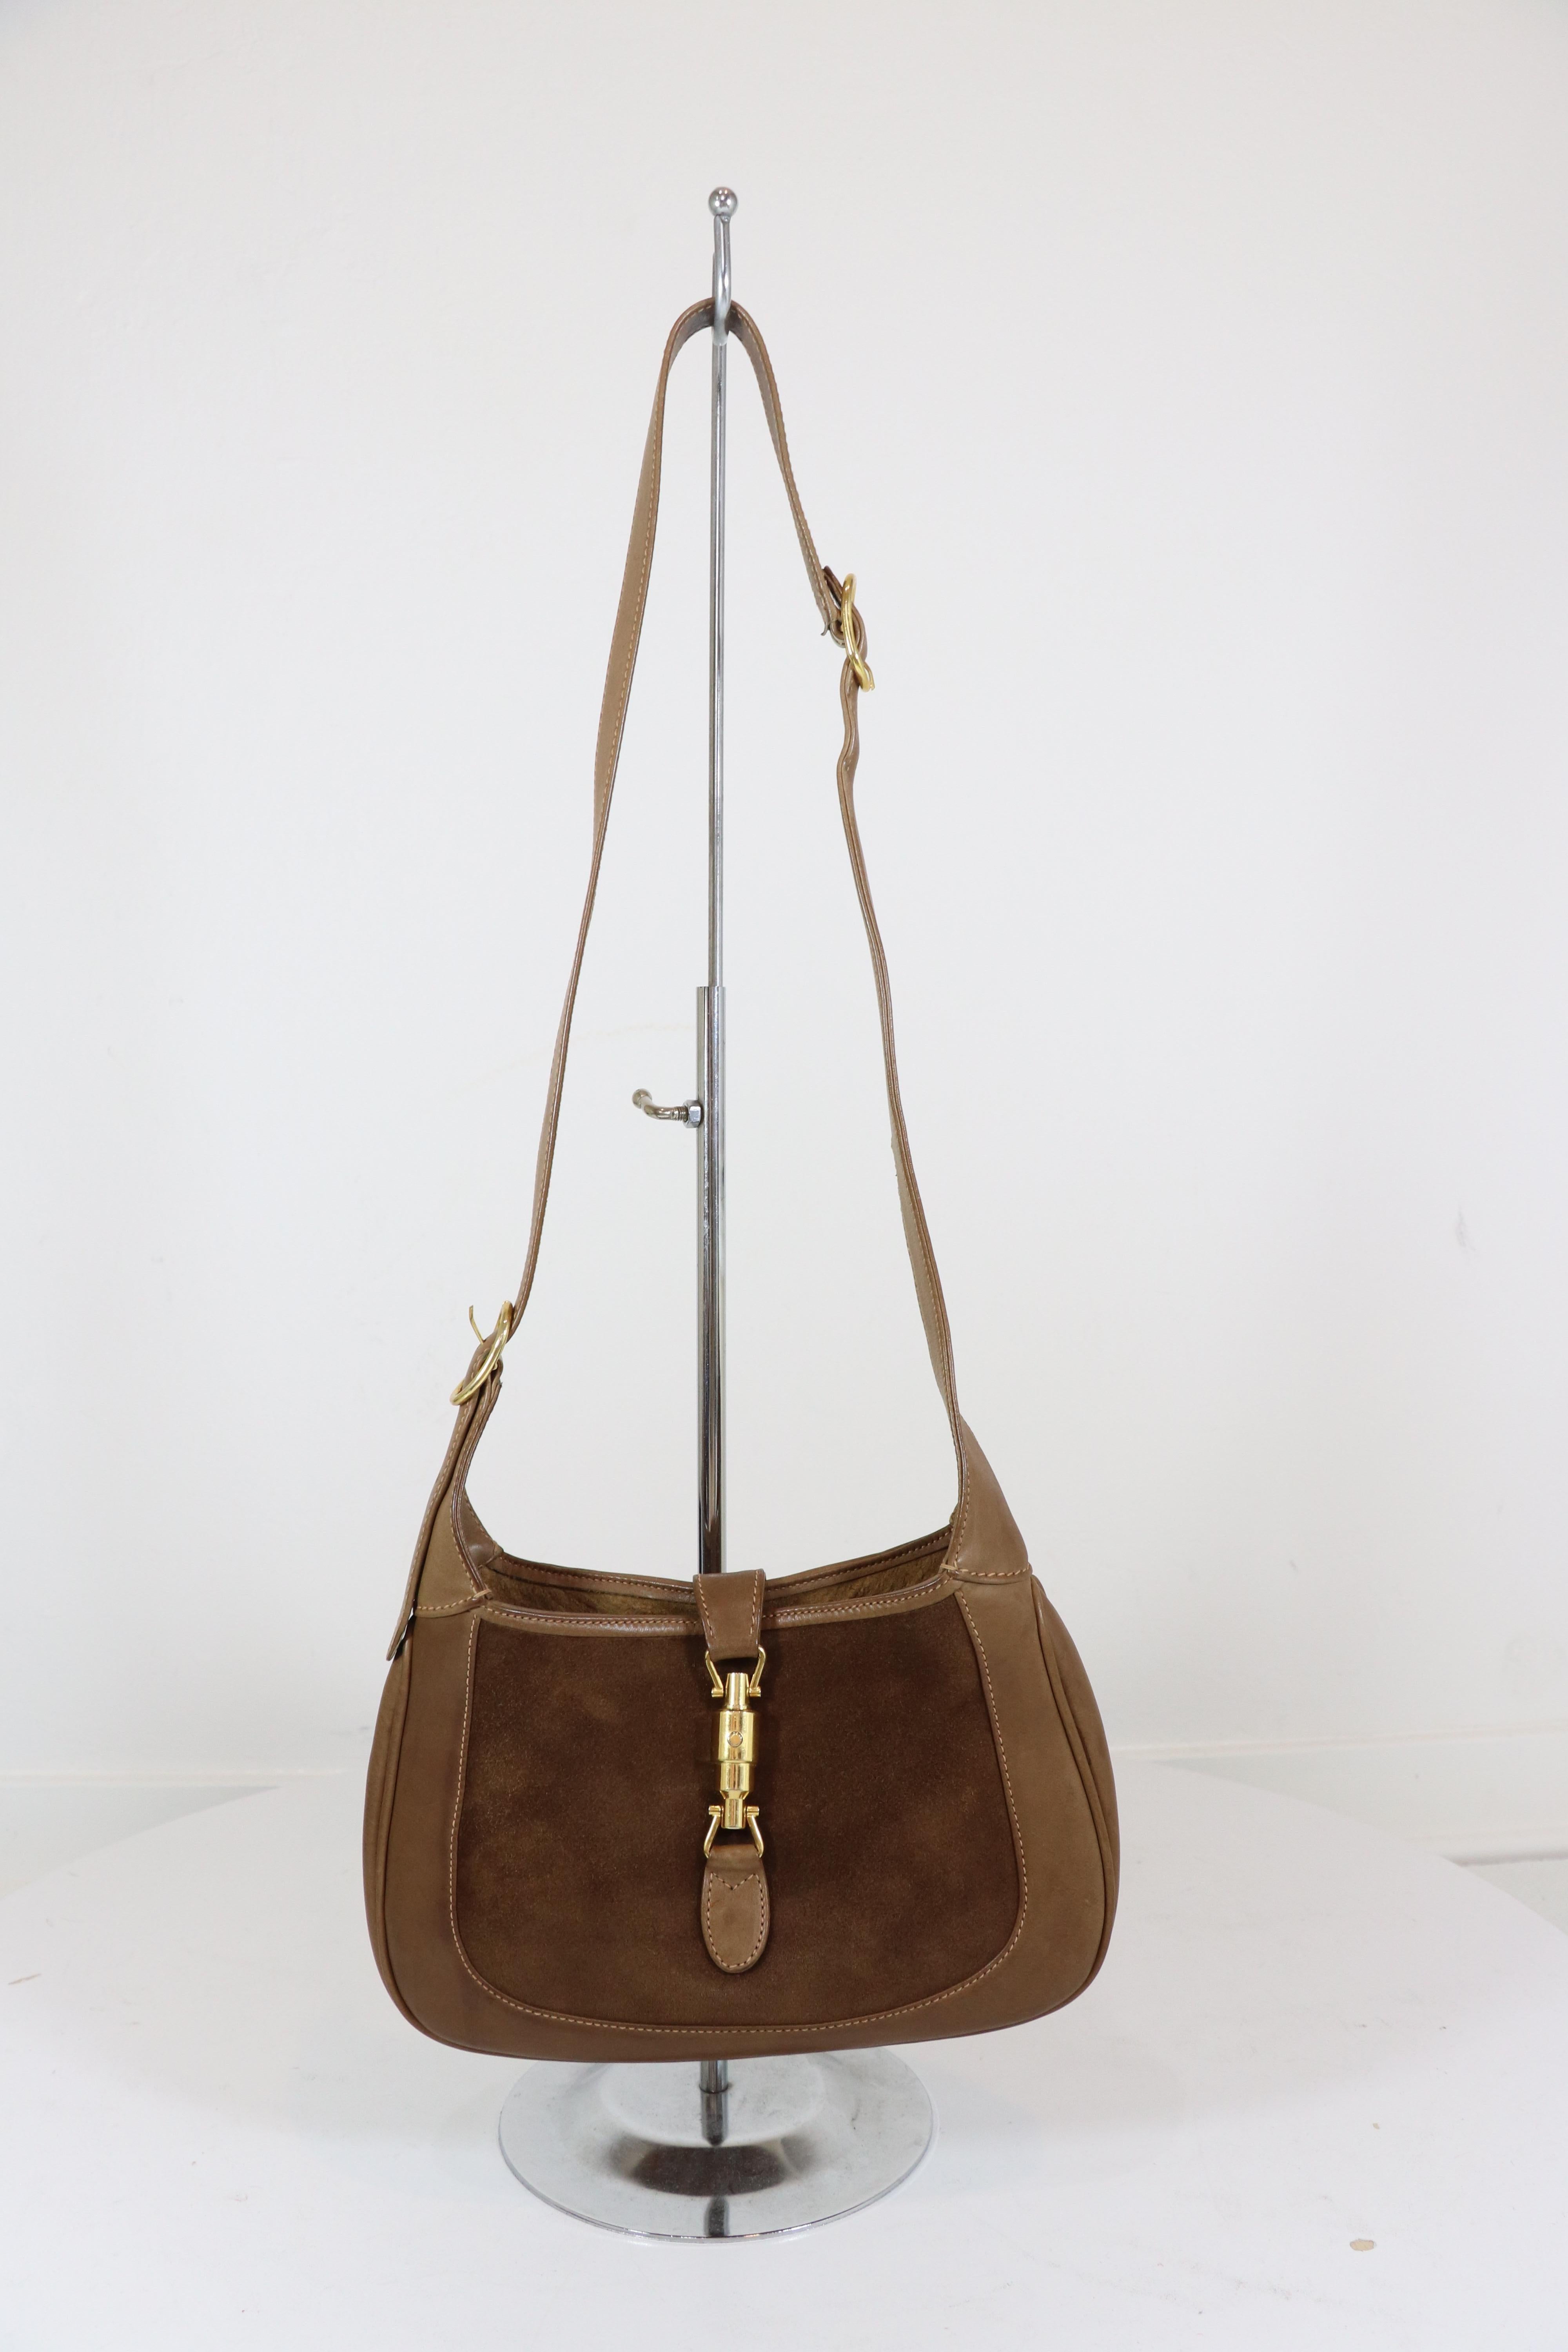 Gucci 1970's vintage small Jackie O bag,  in medium brown suede with brown calf leather trim and handle and a gold-tone piston clasp closure at the front. Interior is fully lined with one zippered pocket. Bag includes a matching leather extension